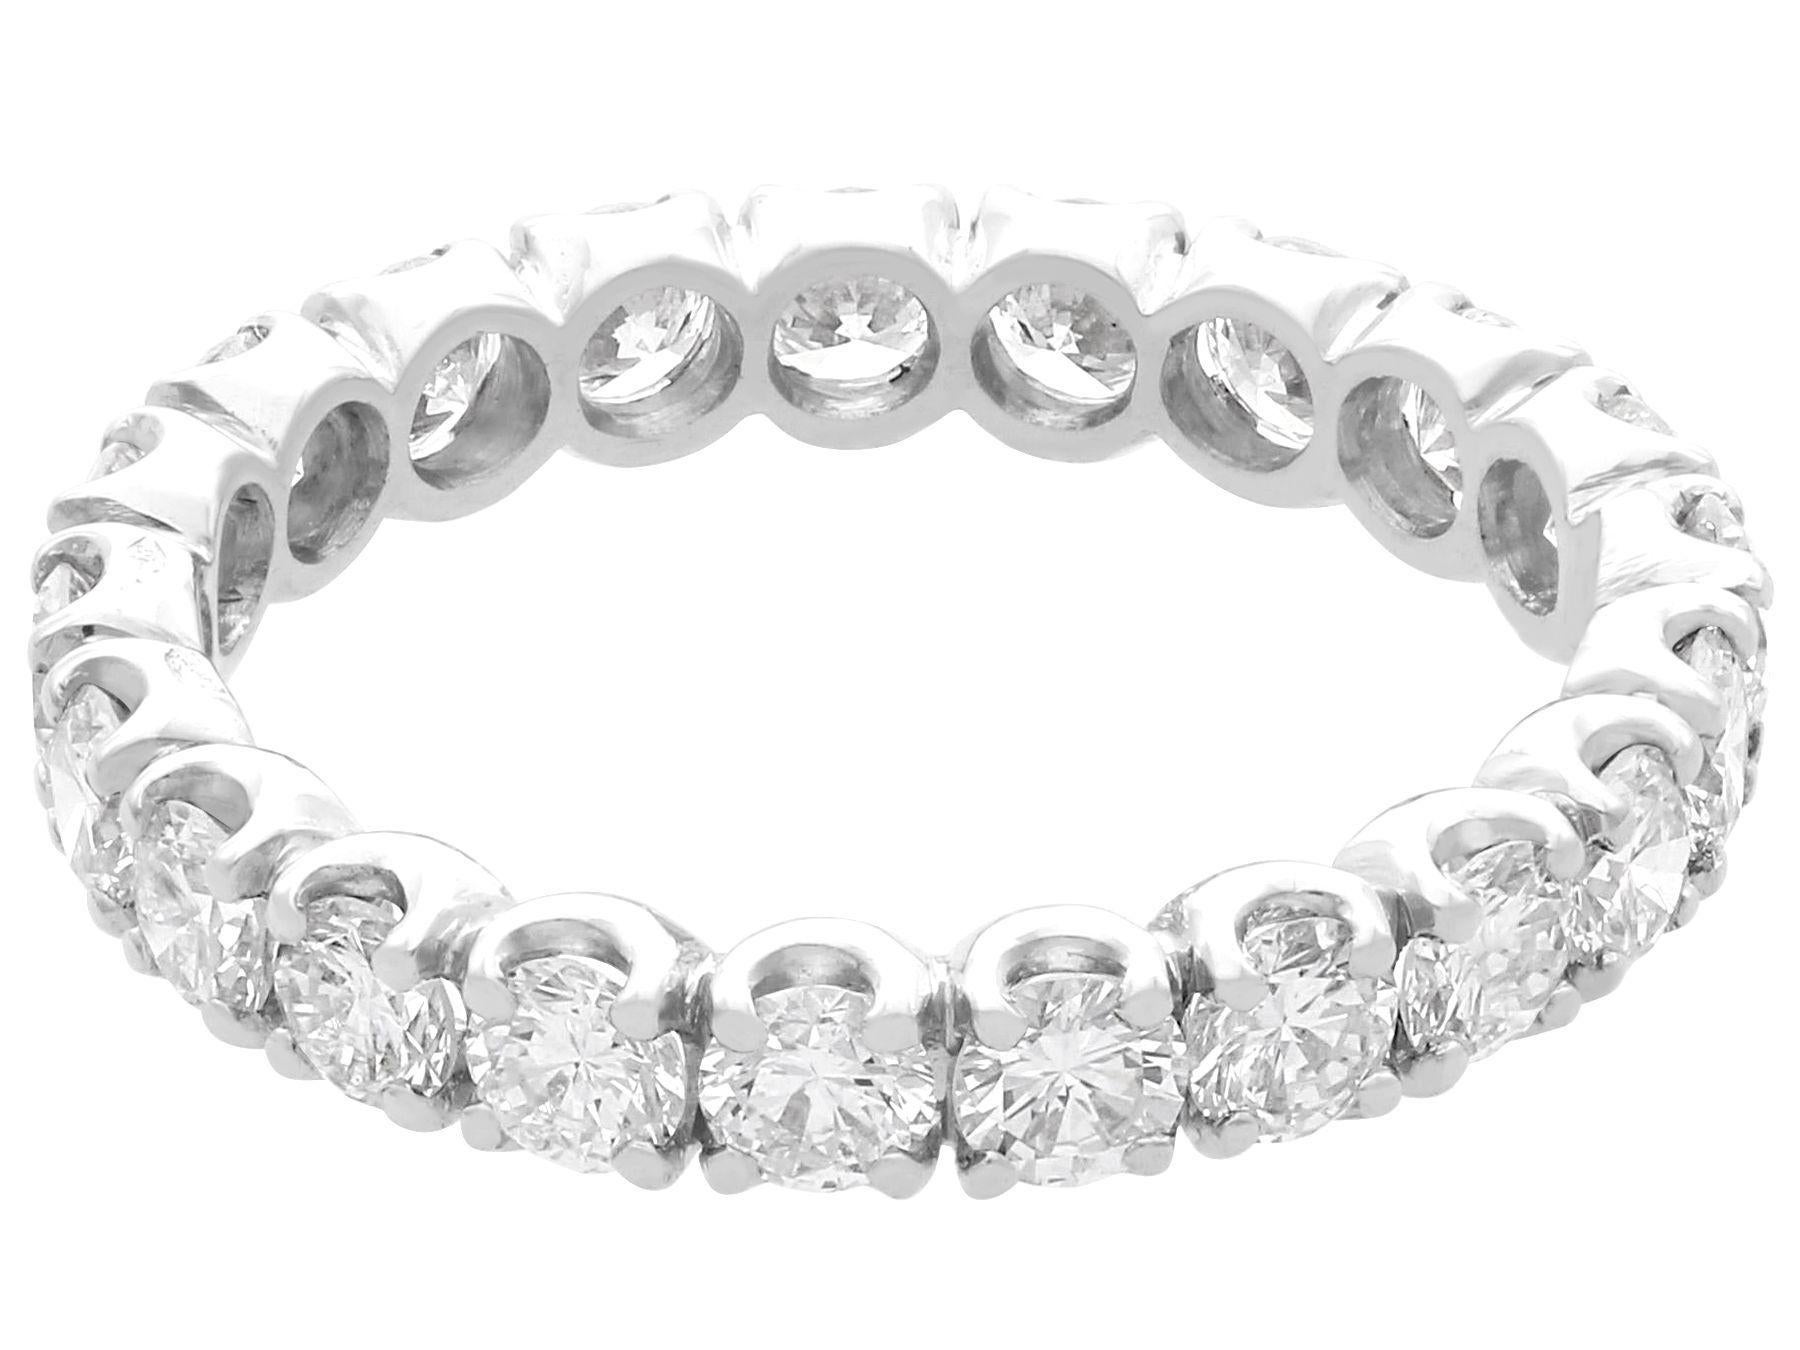 Round Cut 1.89 Carat Diamond and White Gold Full Eternity Ring, circa 1980 For Sale